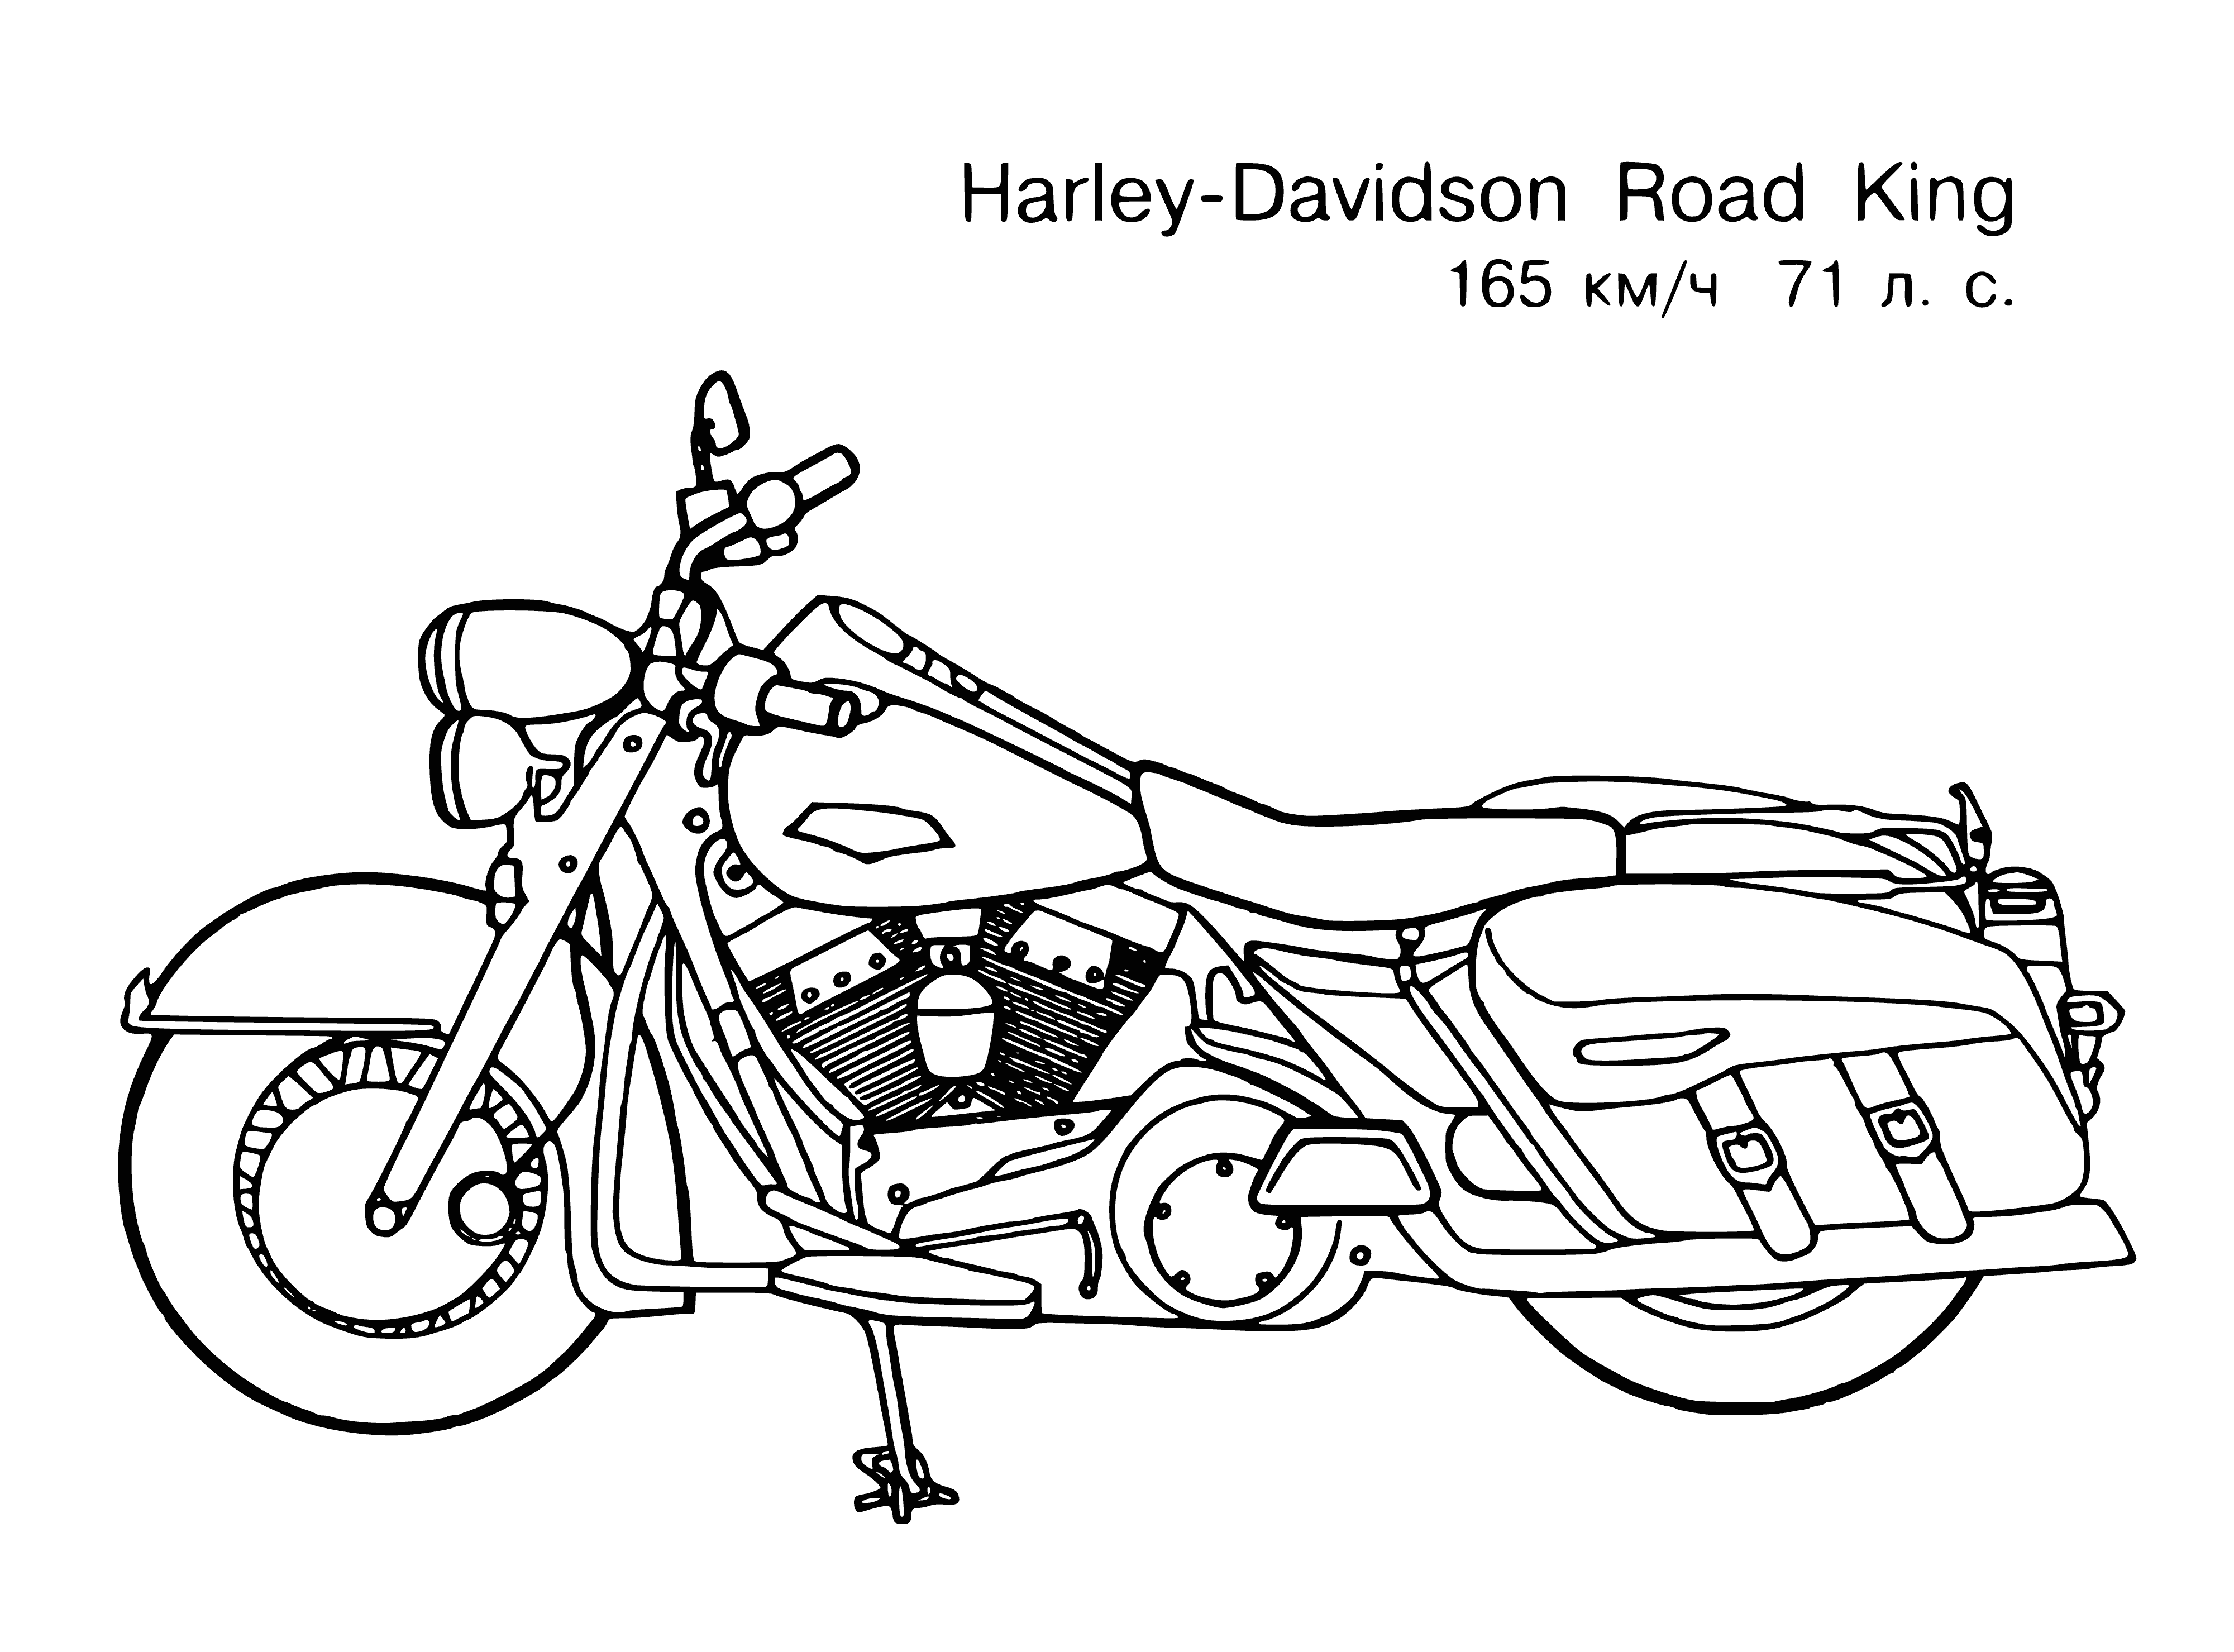 coloring page: Black motorcycle parked on city street w/ yellow decal, handlebars on right, dual headlights & chrome exhaust pipe.